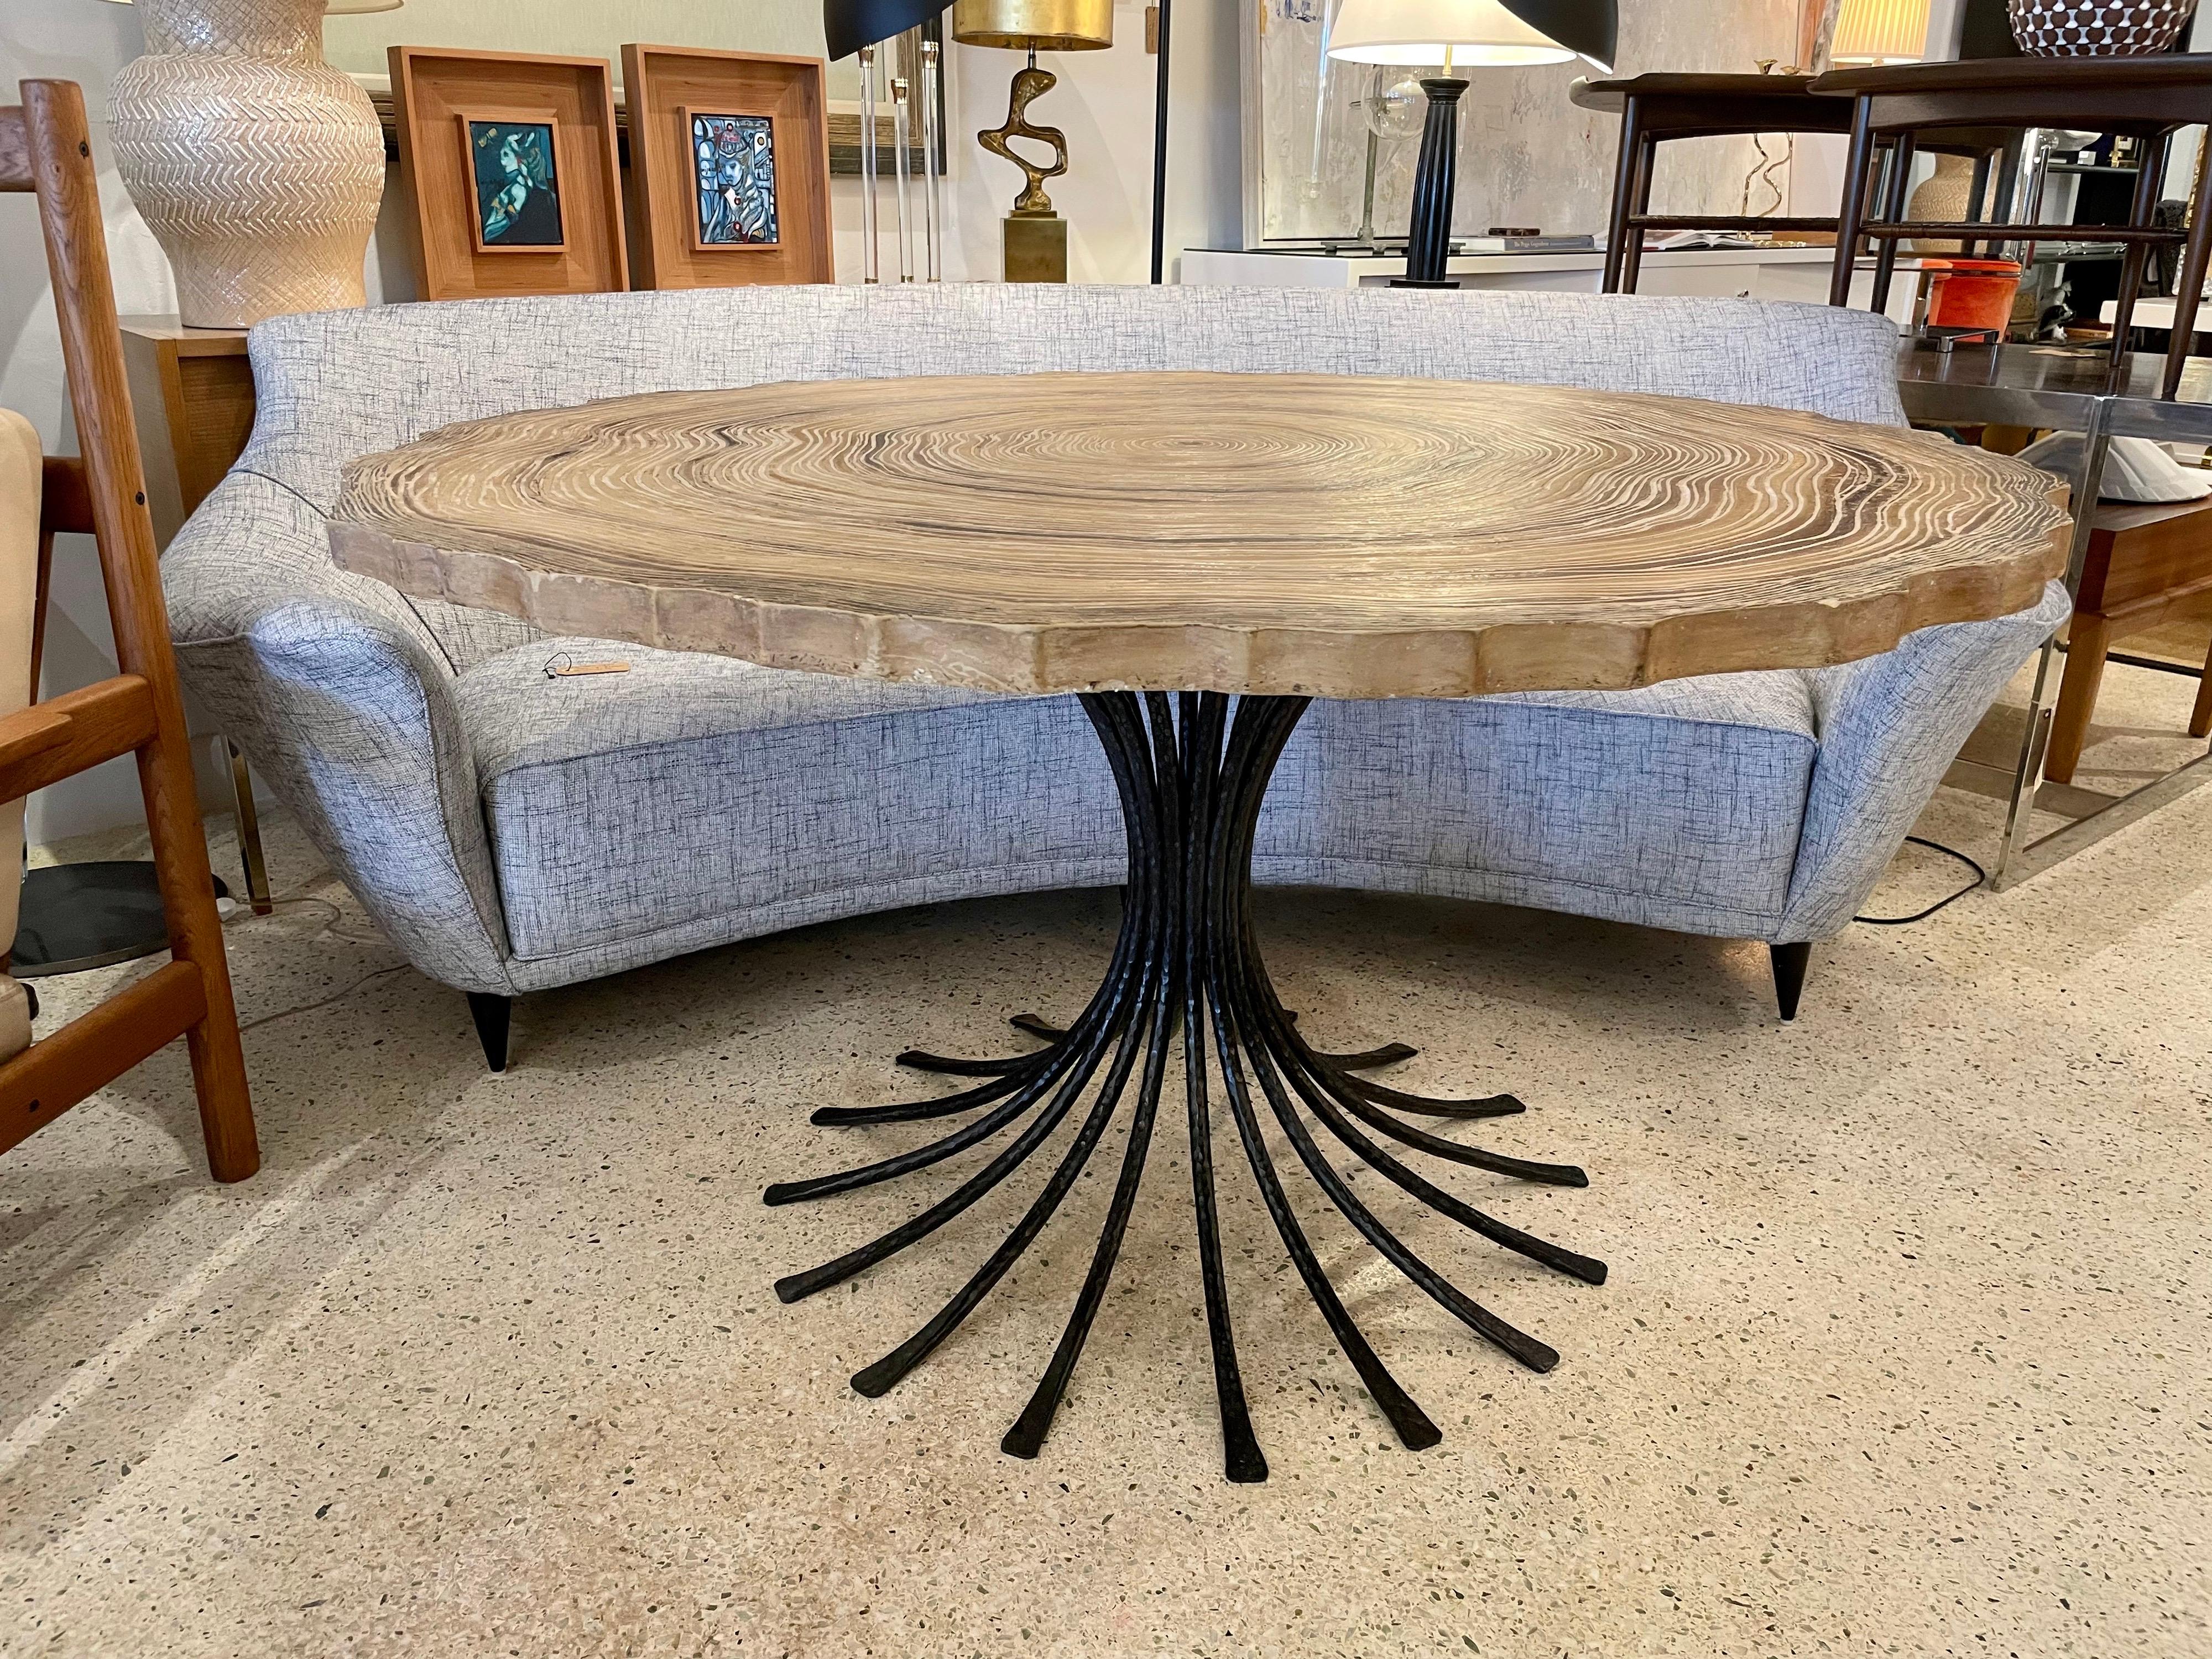 Faux Bois Trompe L'oeil Tree Trunk Top Dining Table on Iron Base